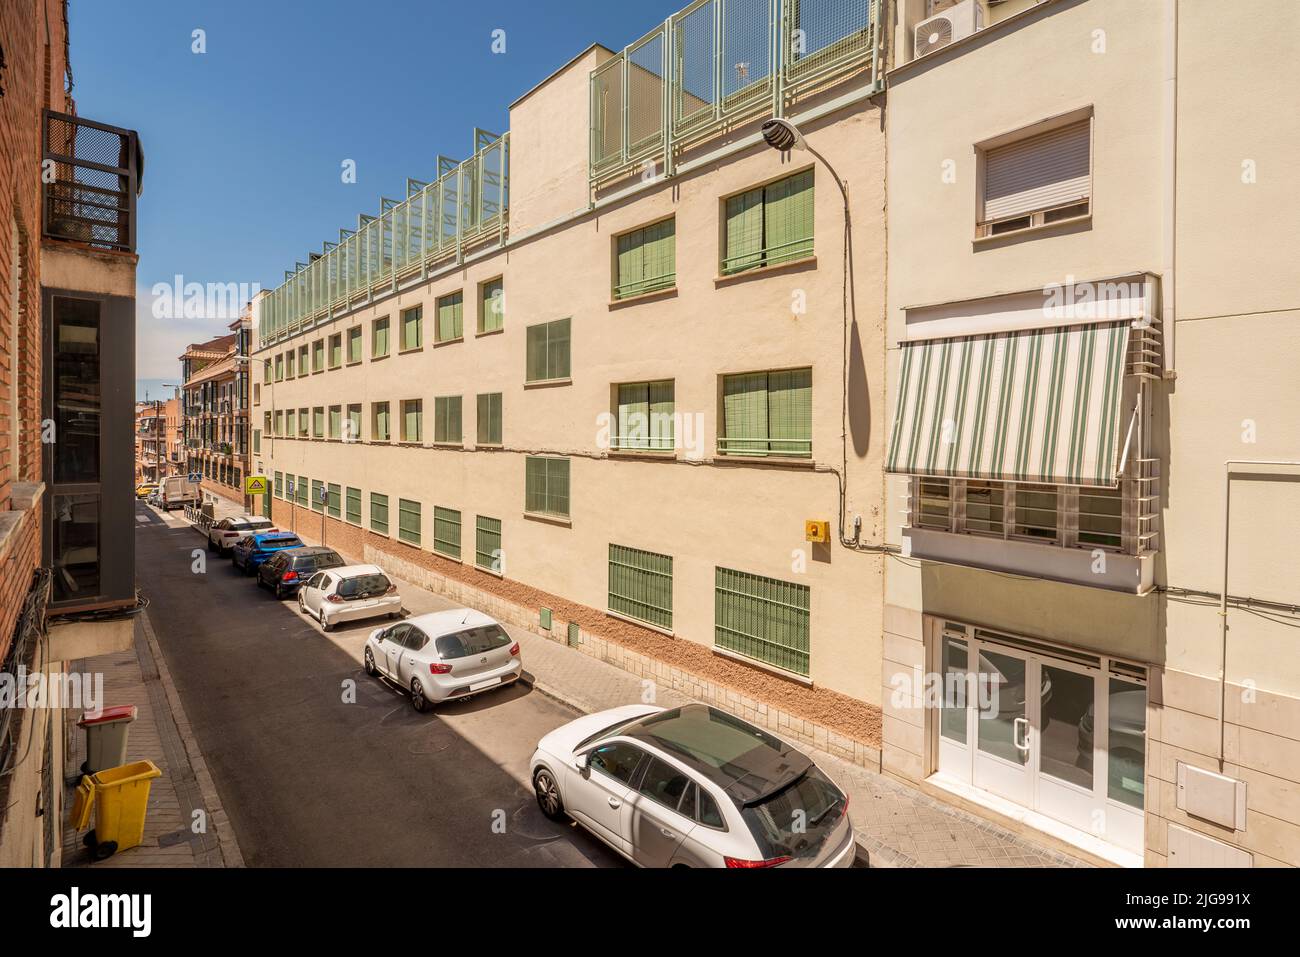 Facade residential buildings in a narrow street full of parked cars Stock Photo